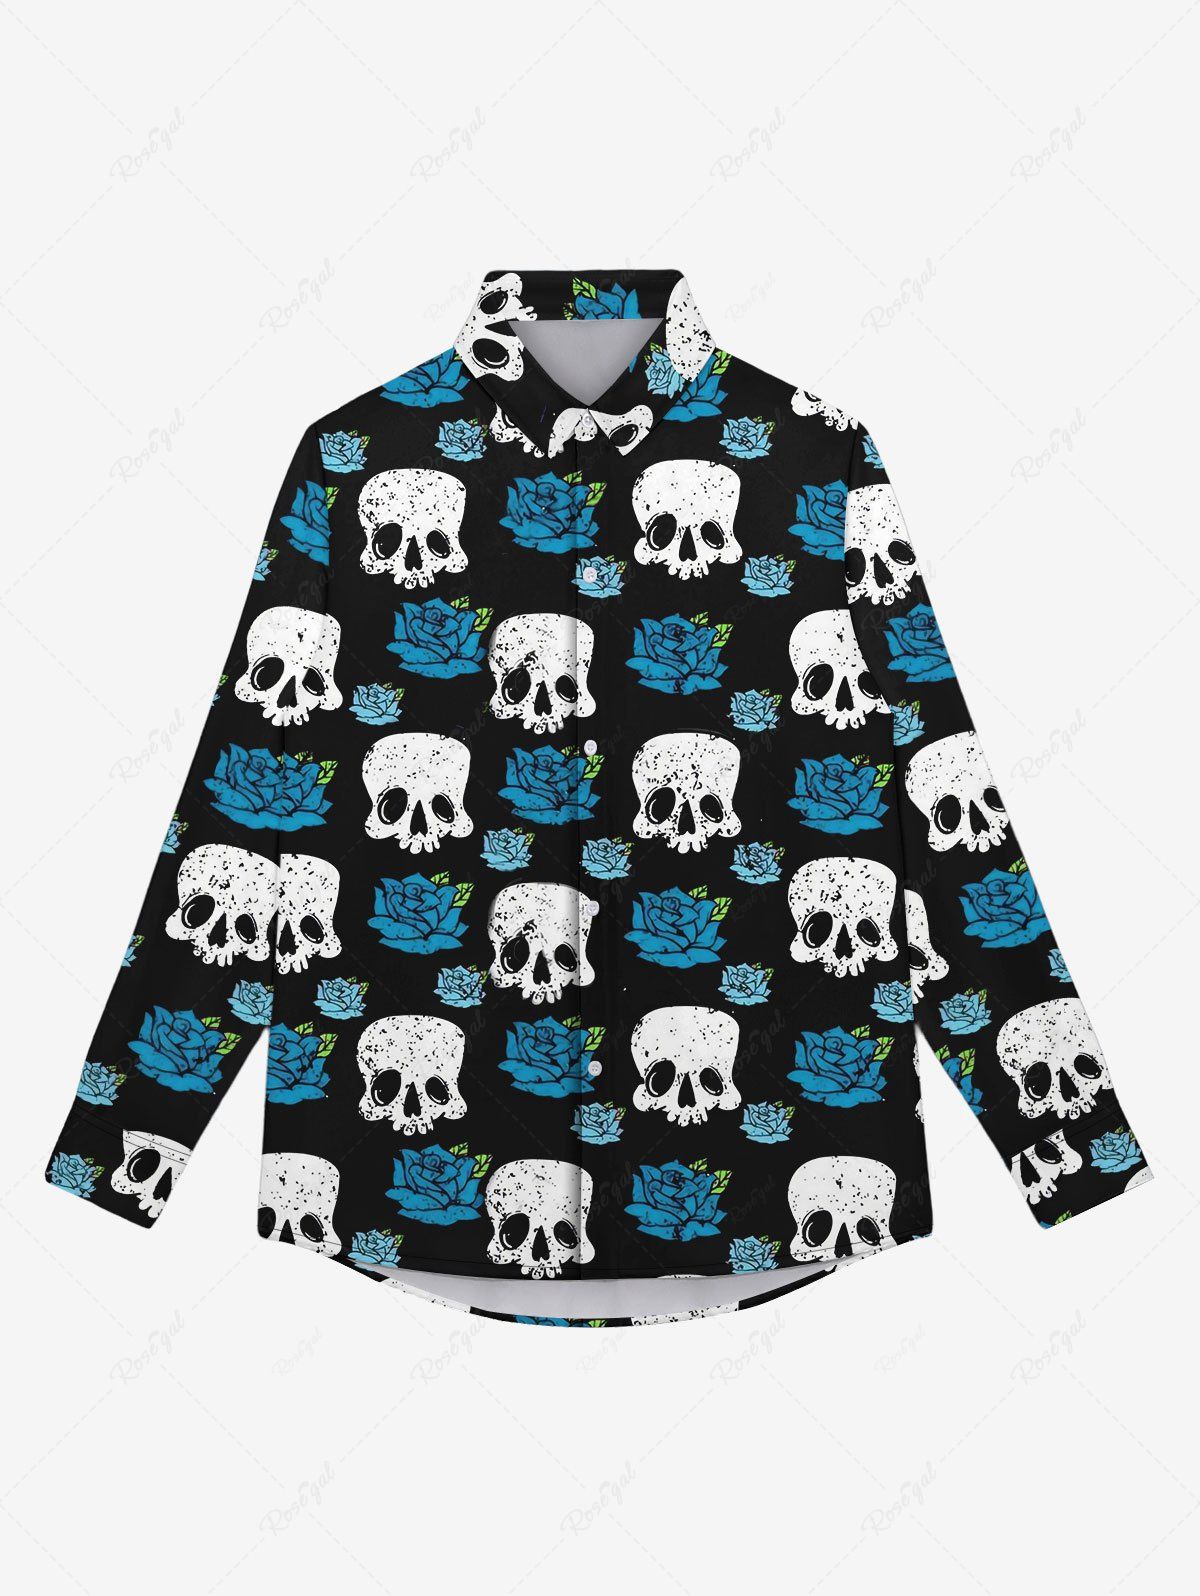 Outfit Gothic Turn-down Collar Skulls Rose Flower Print Buttons Shirt For Men  